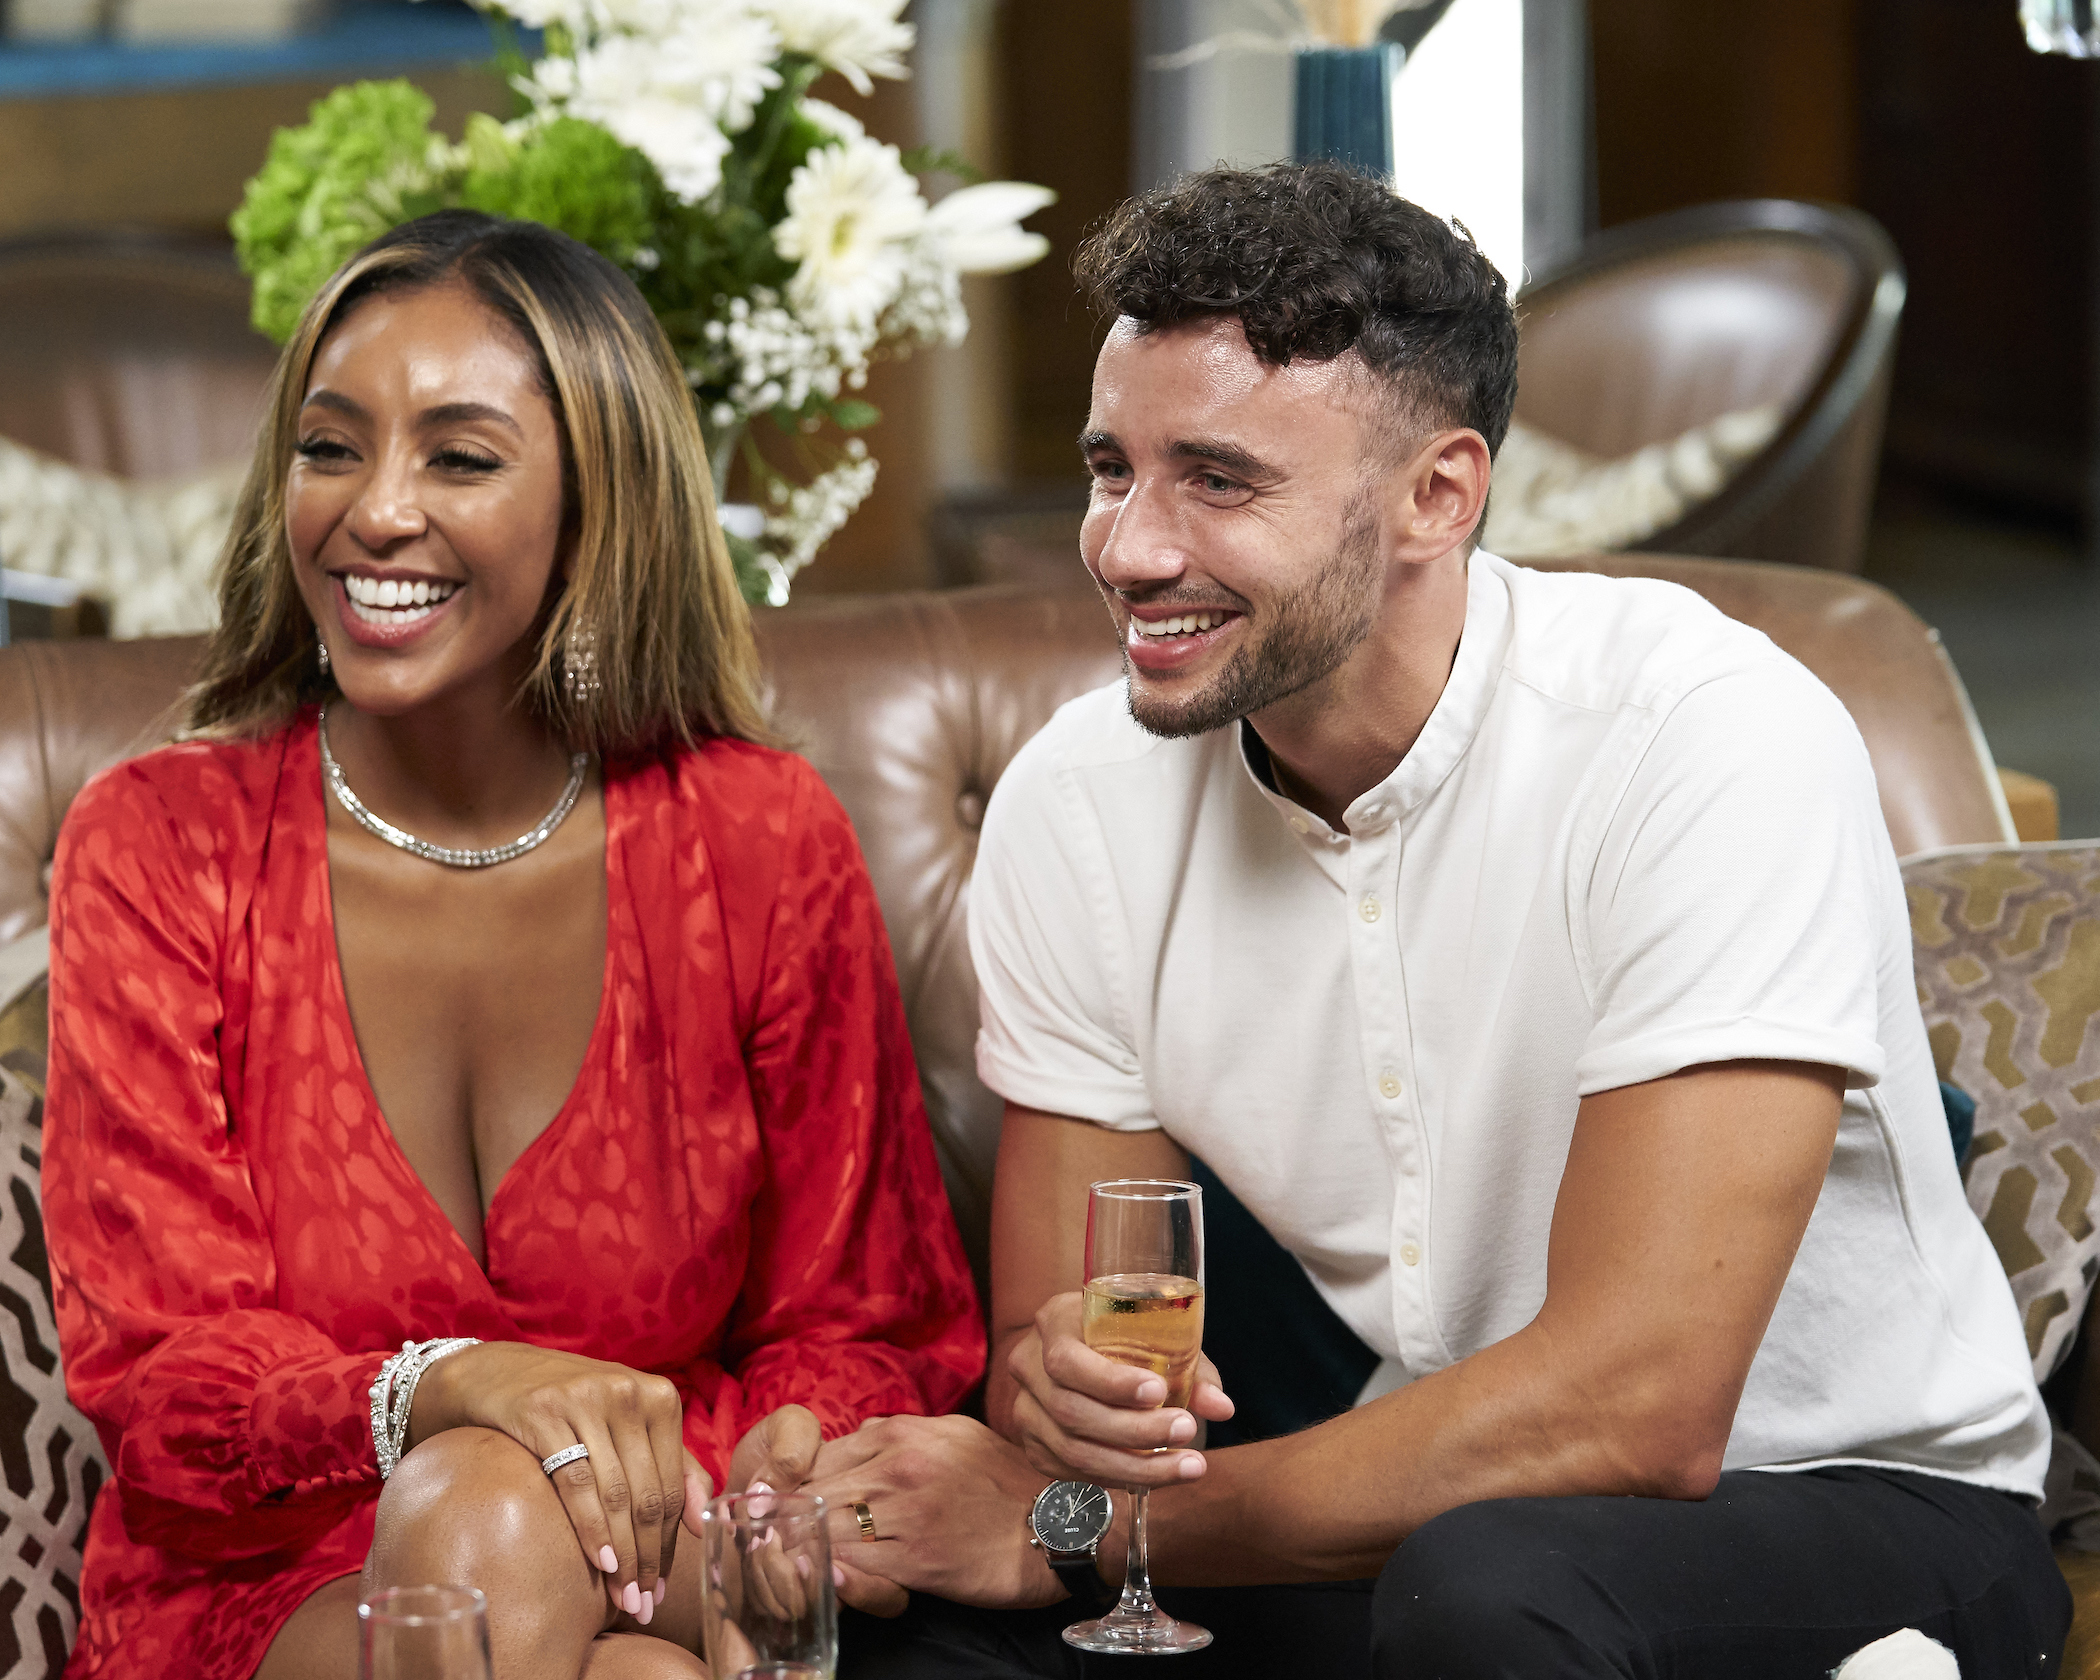 Tayshia Adams and Brendan Morais sitting next to each other and smiling on 'The Bachelorette.' Brendan Morais is on 'Bachelor in Paradise' Season 7